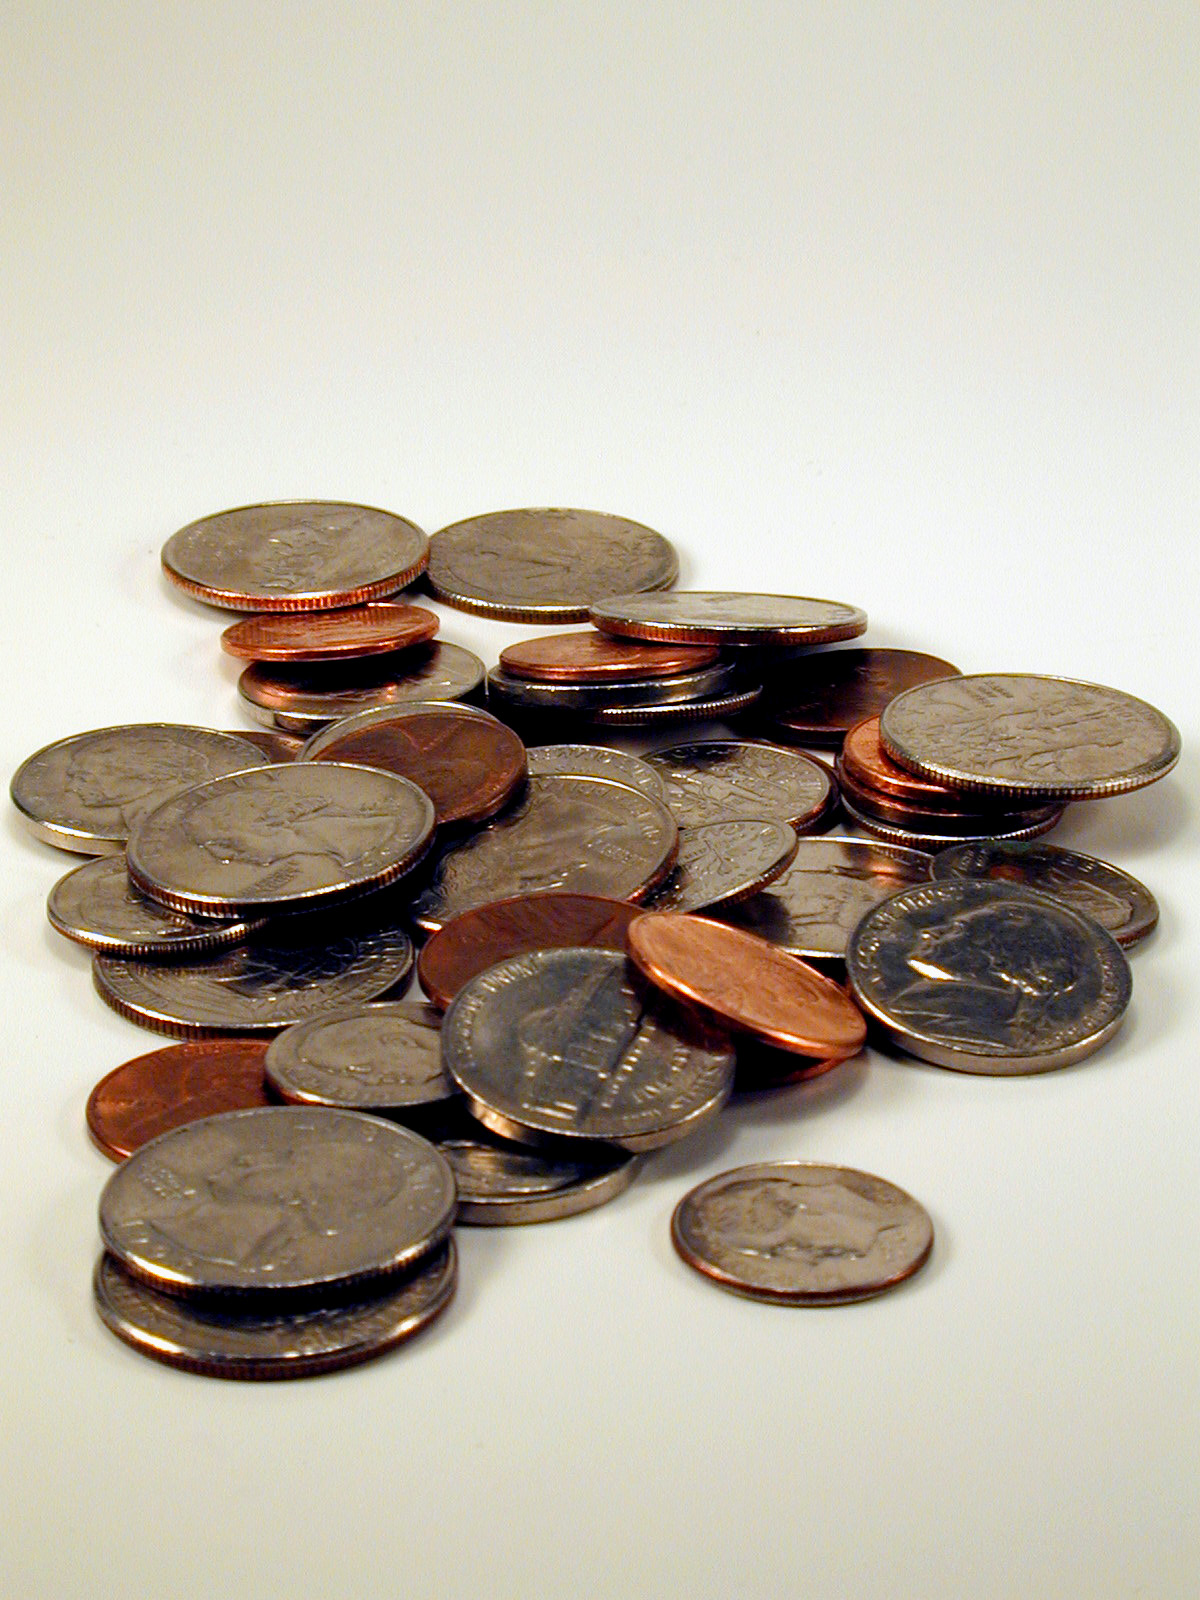 coins pictures